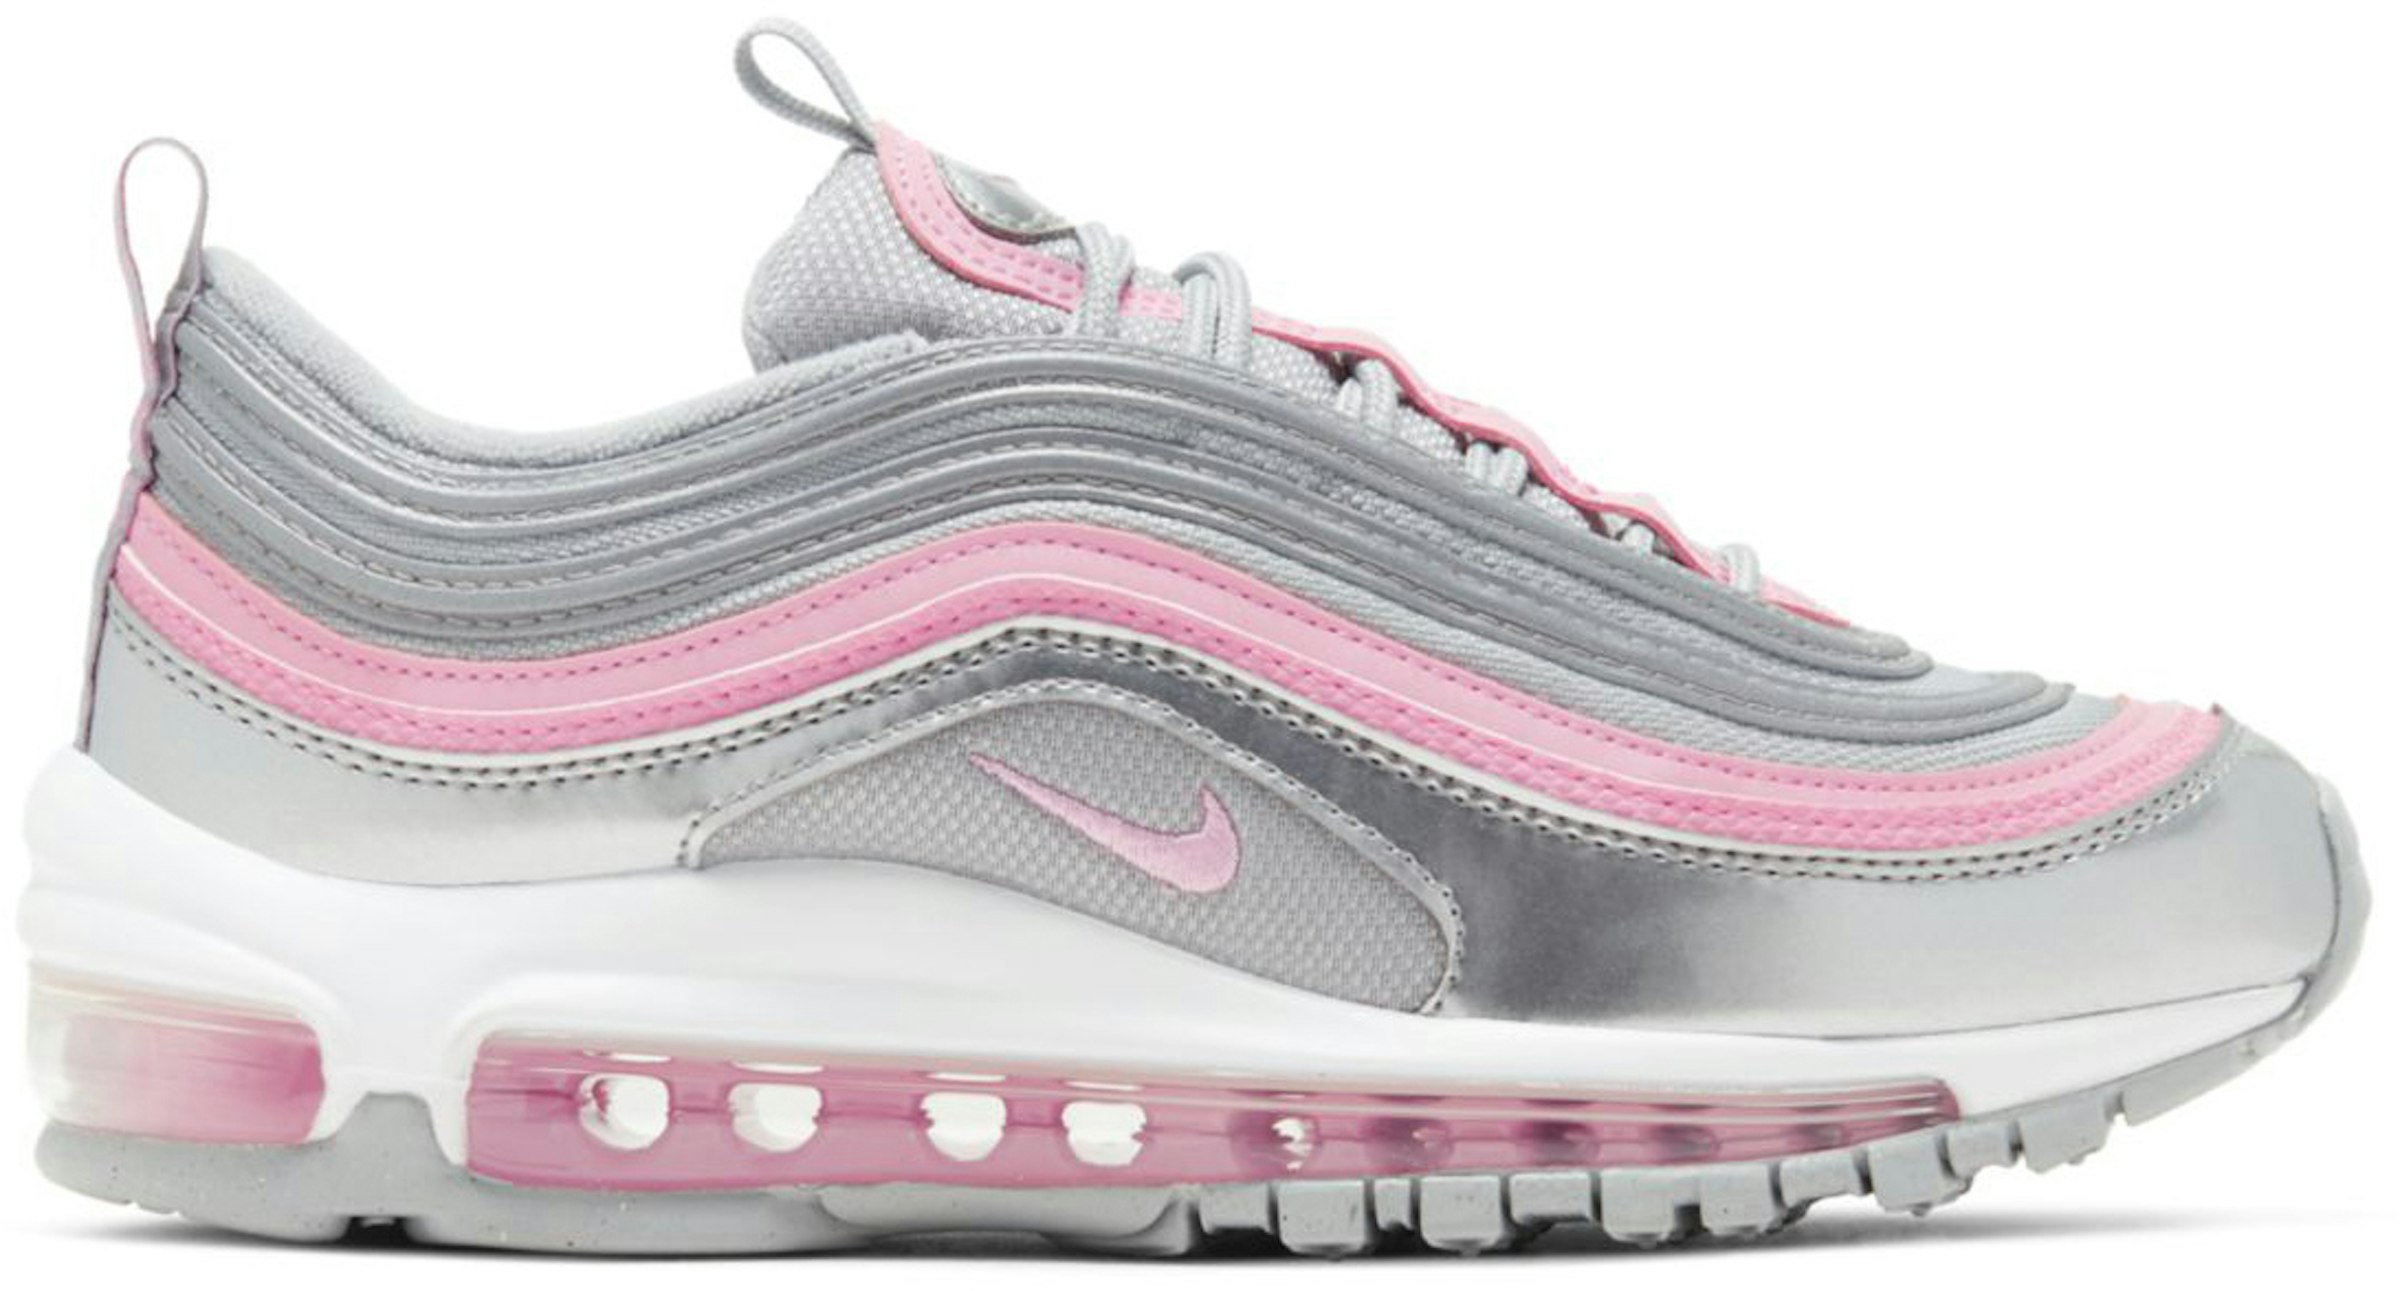 Nike Pink Silver (GS) - 921522-021 US